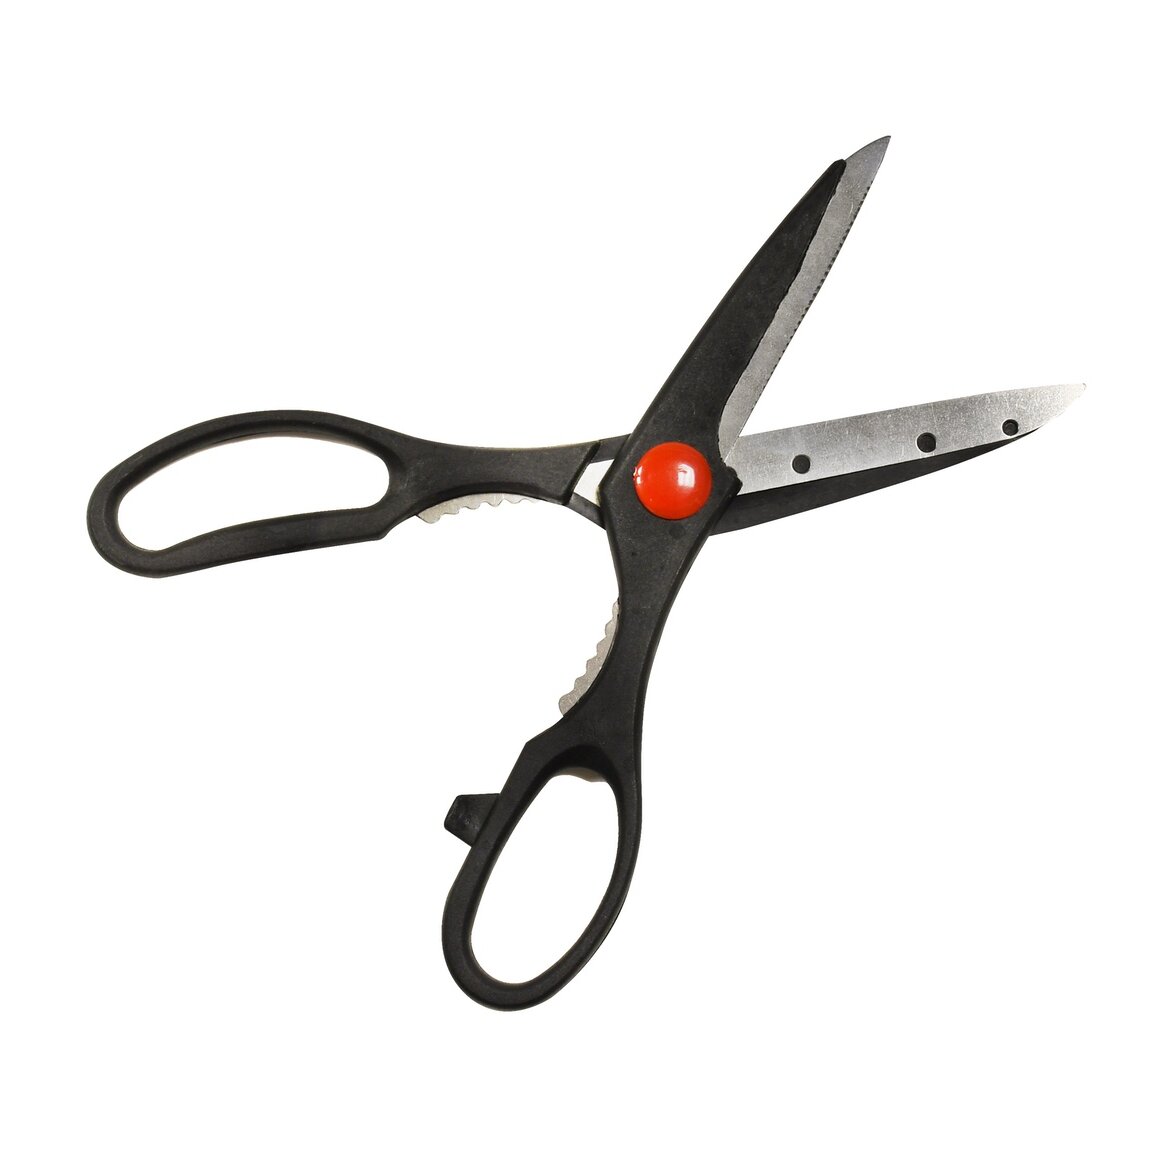 ZWILLING Shears & Scissors 9-inch Superfection Classic Bent Shears  stainless steel